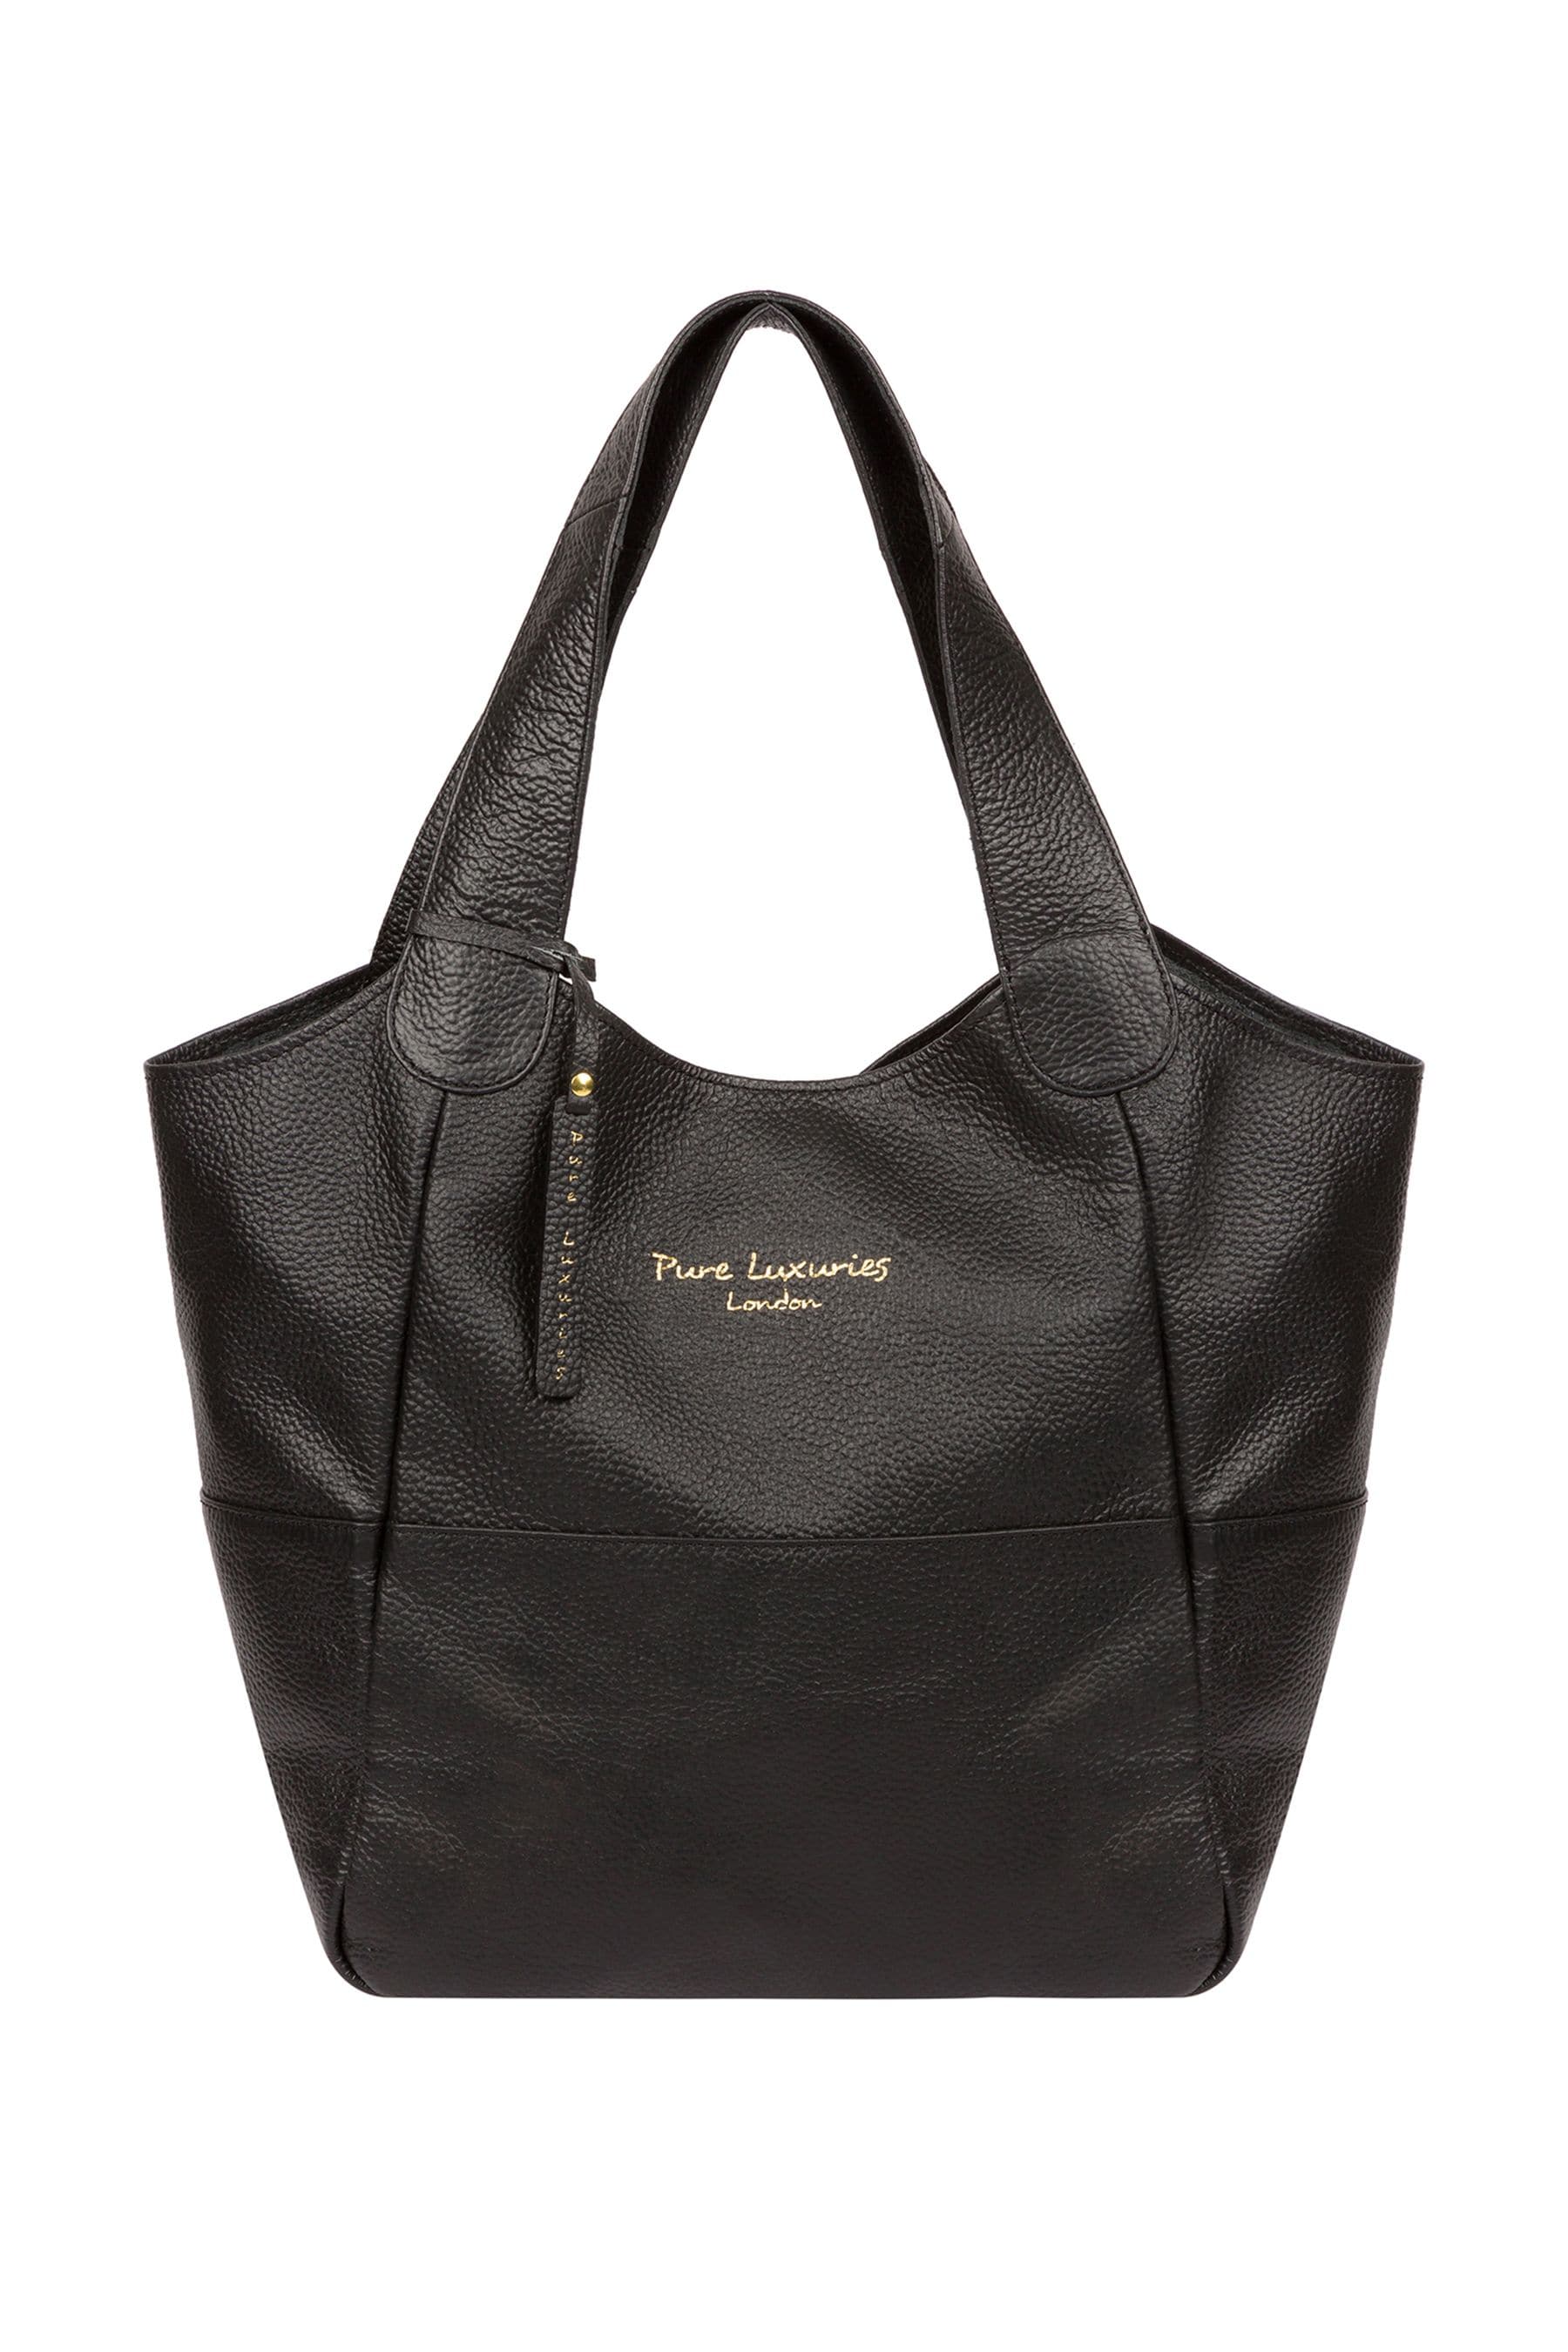 Buy Pure Luxuries London Freer Leather Tote Bag from Next Ireland